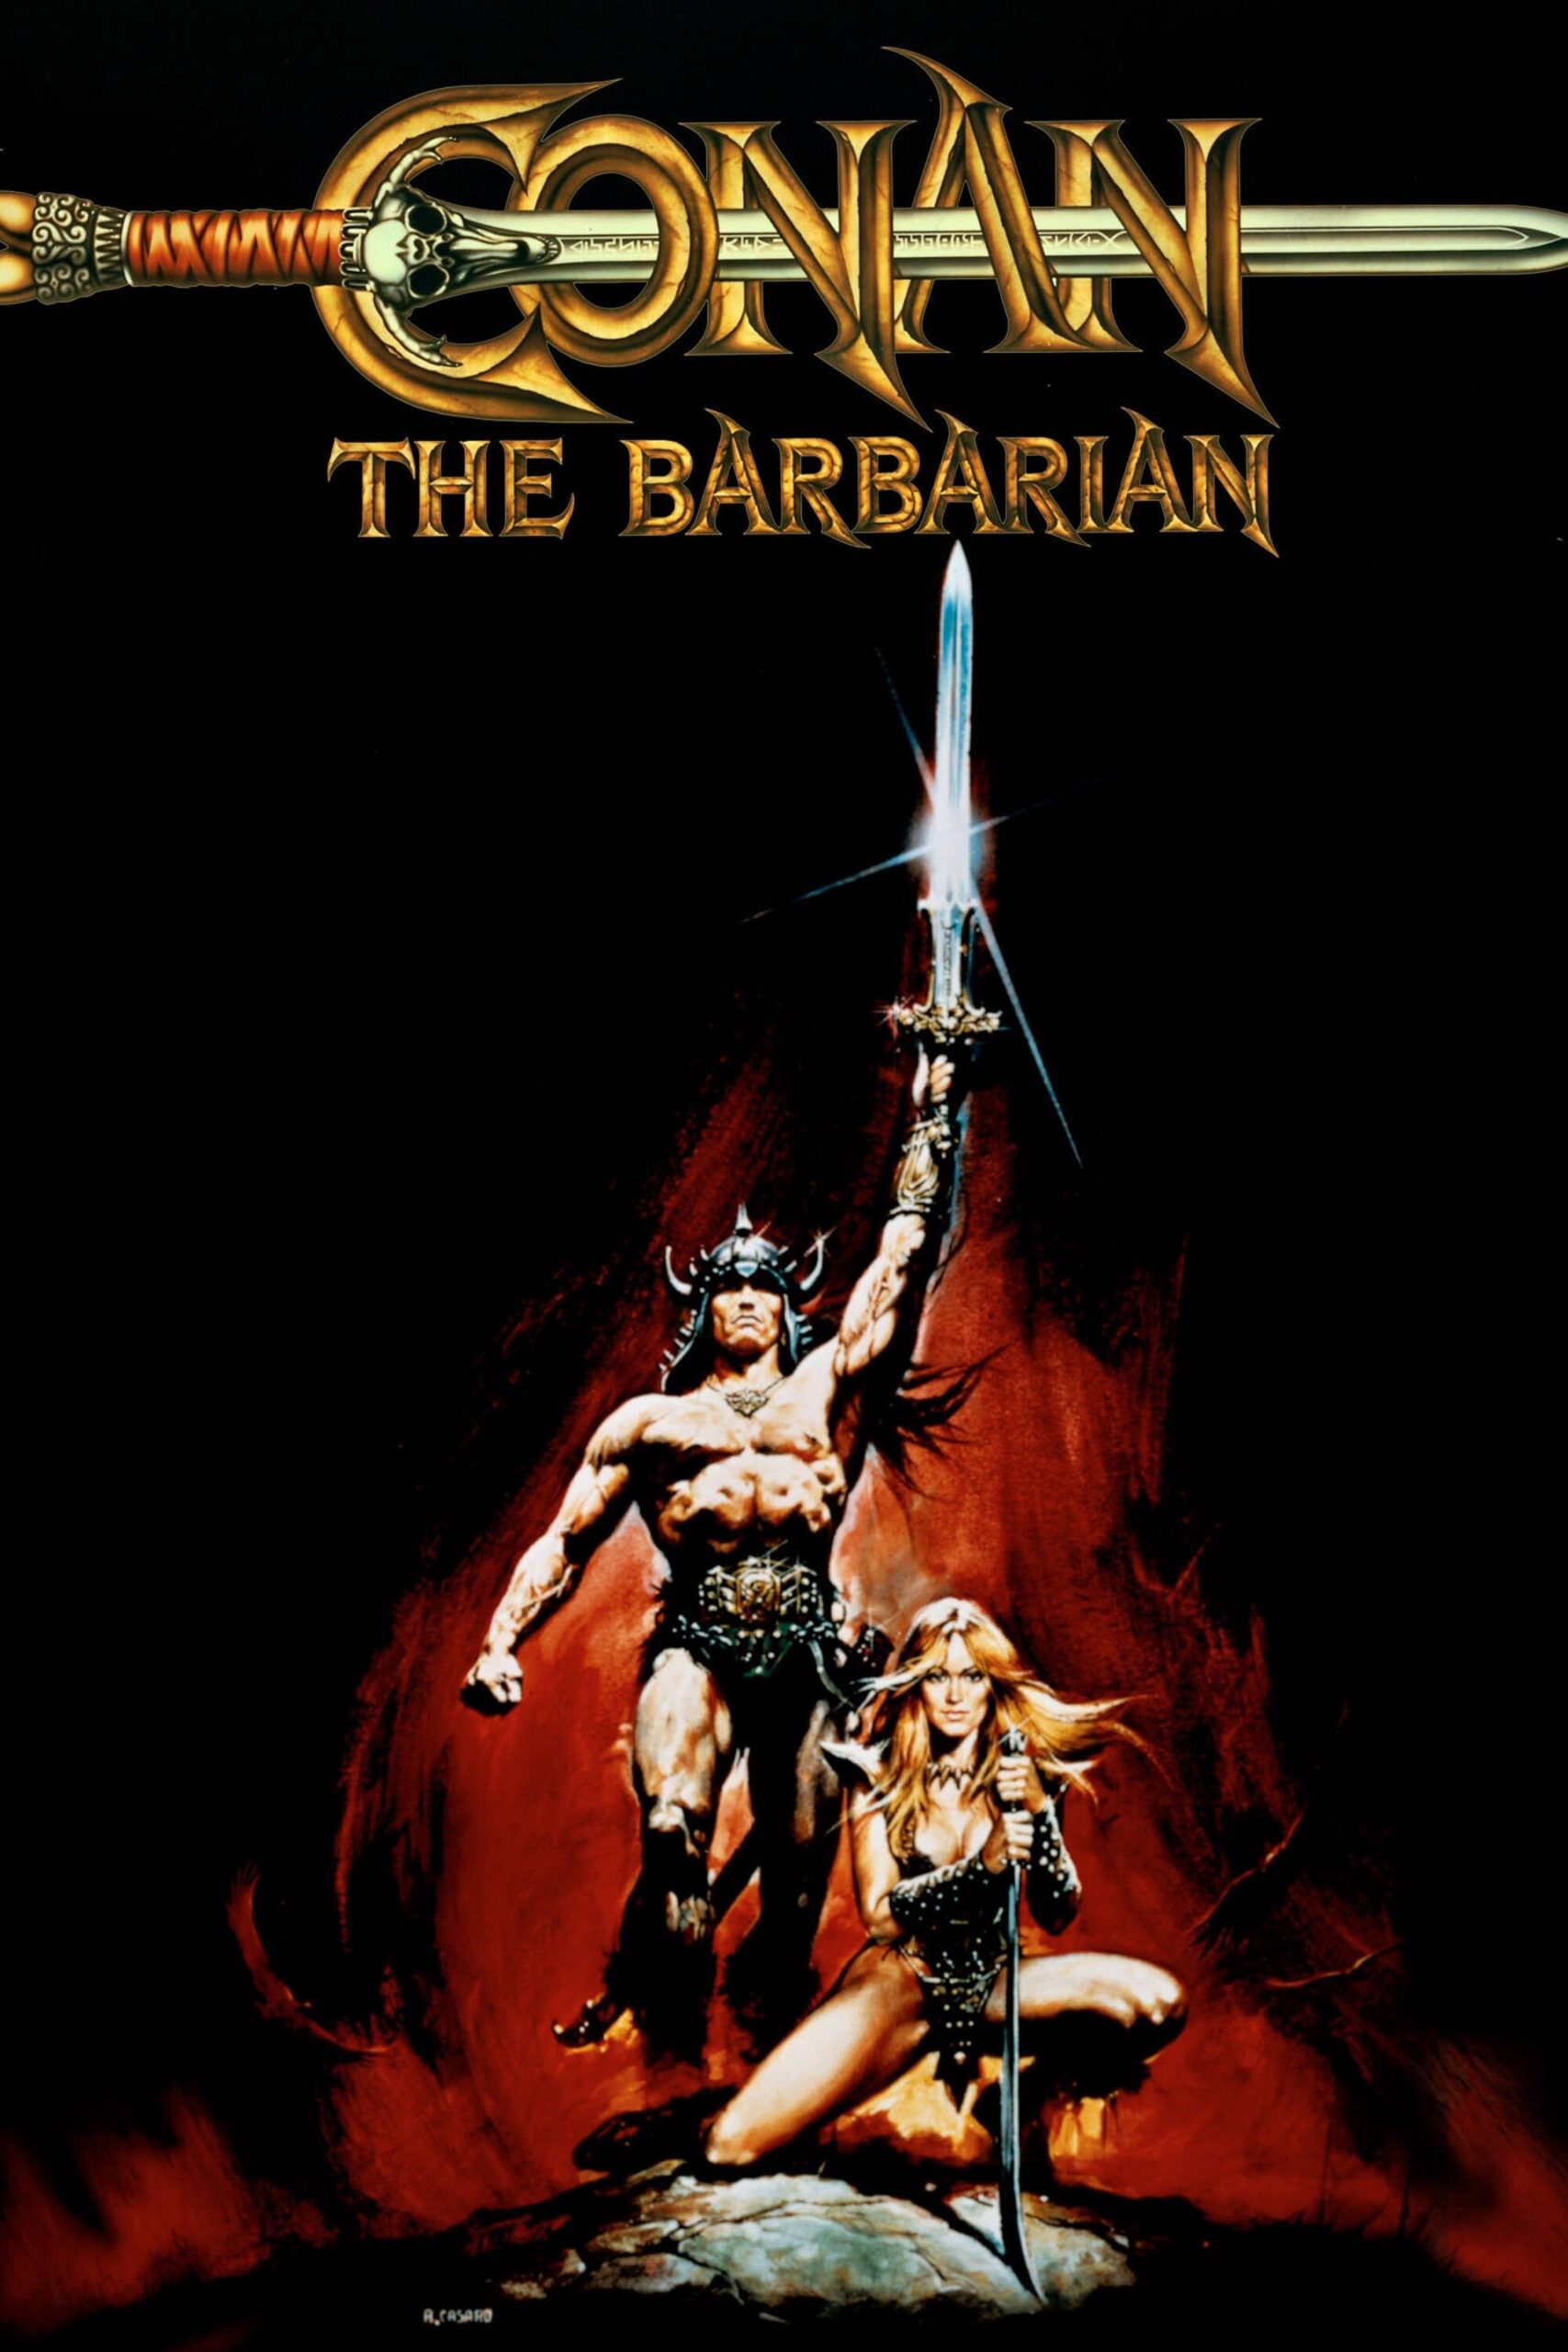 Conan The Barbarian Released in 1982